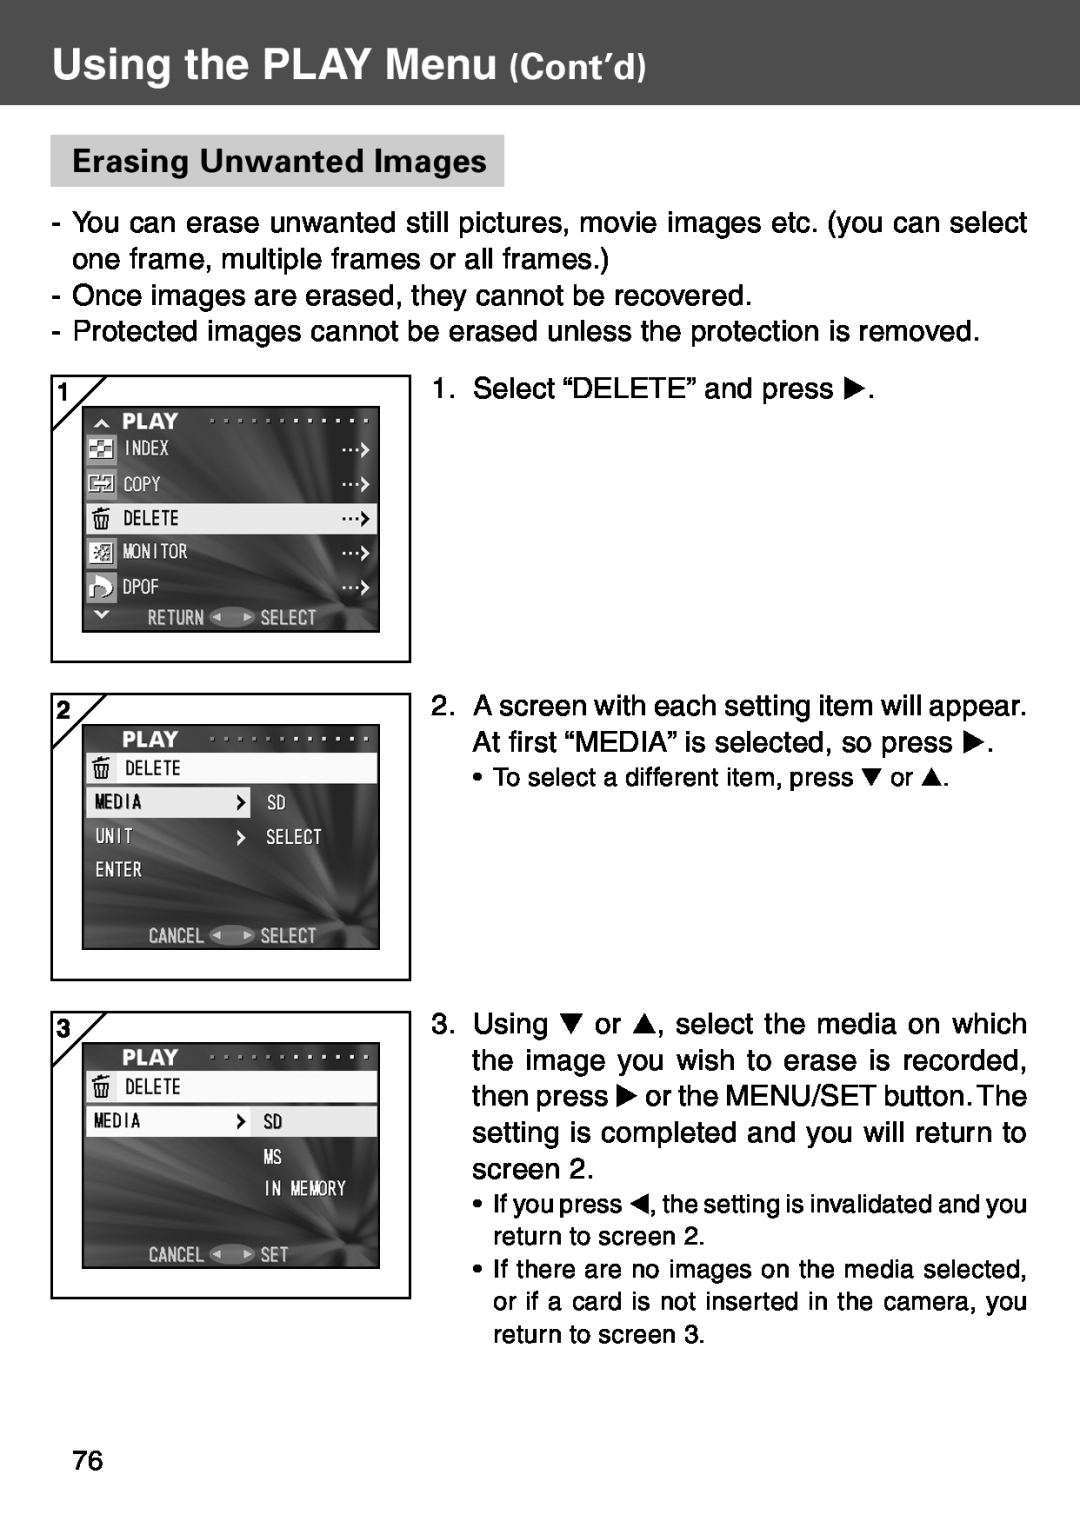 Konica Minolta KD-500Z user manual Erasing Unwanted Images, Using the PLAY Menu Cont’d, the setting is invalidated and you 